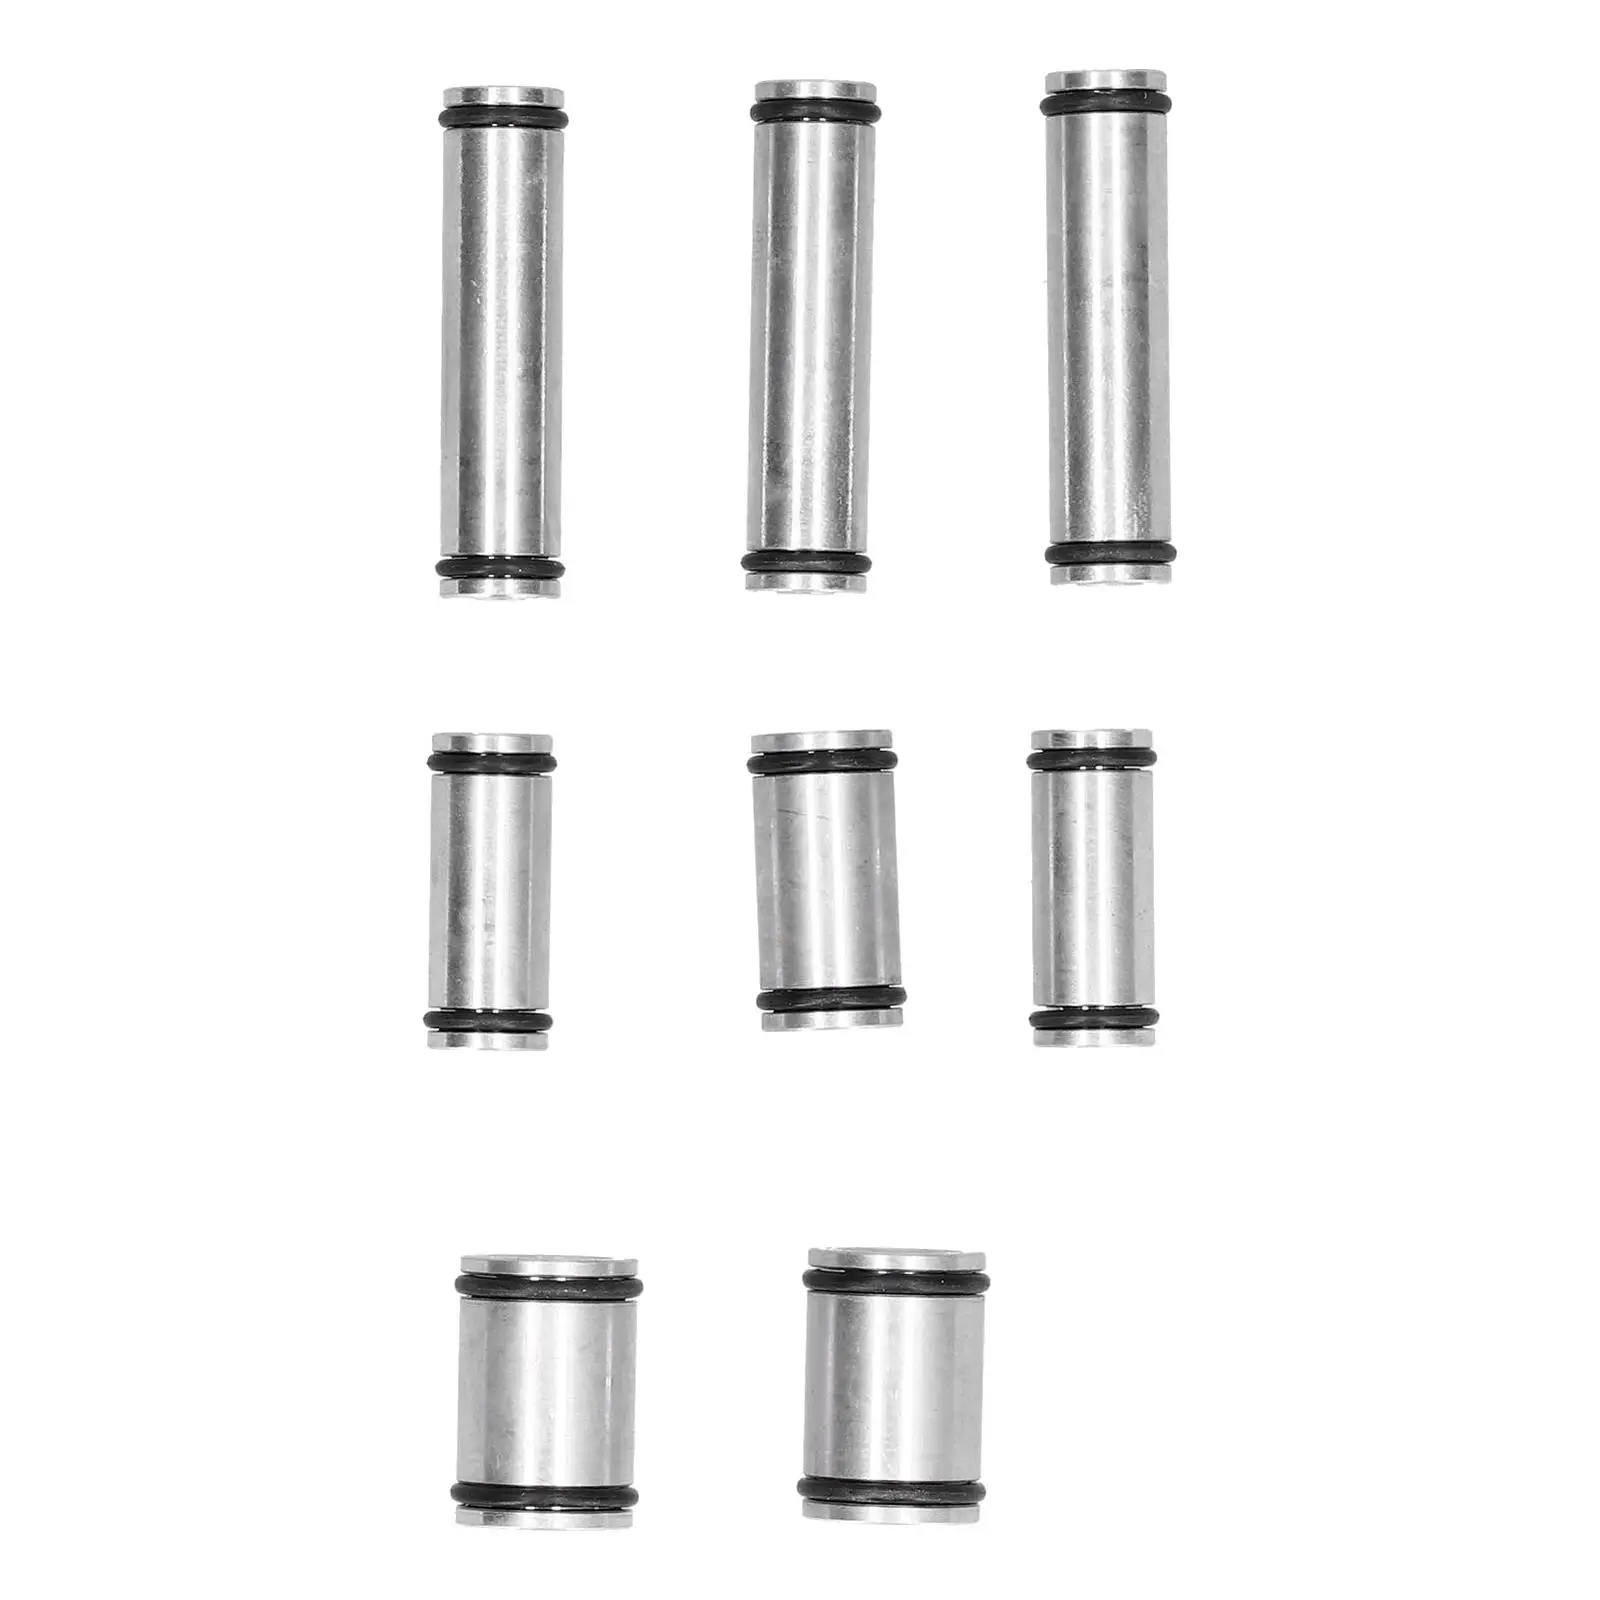 8 Pieces Car Oil Pipe Kit Replacement for Transporter 09-11 L4 2.0L